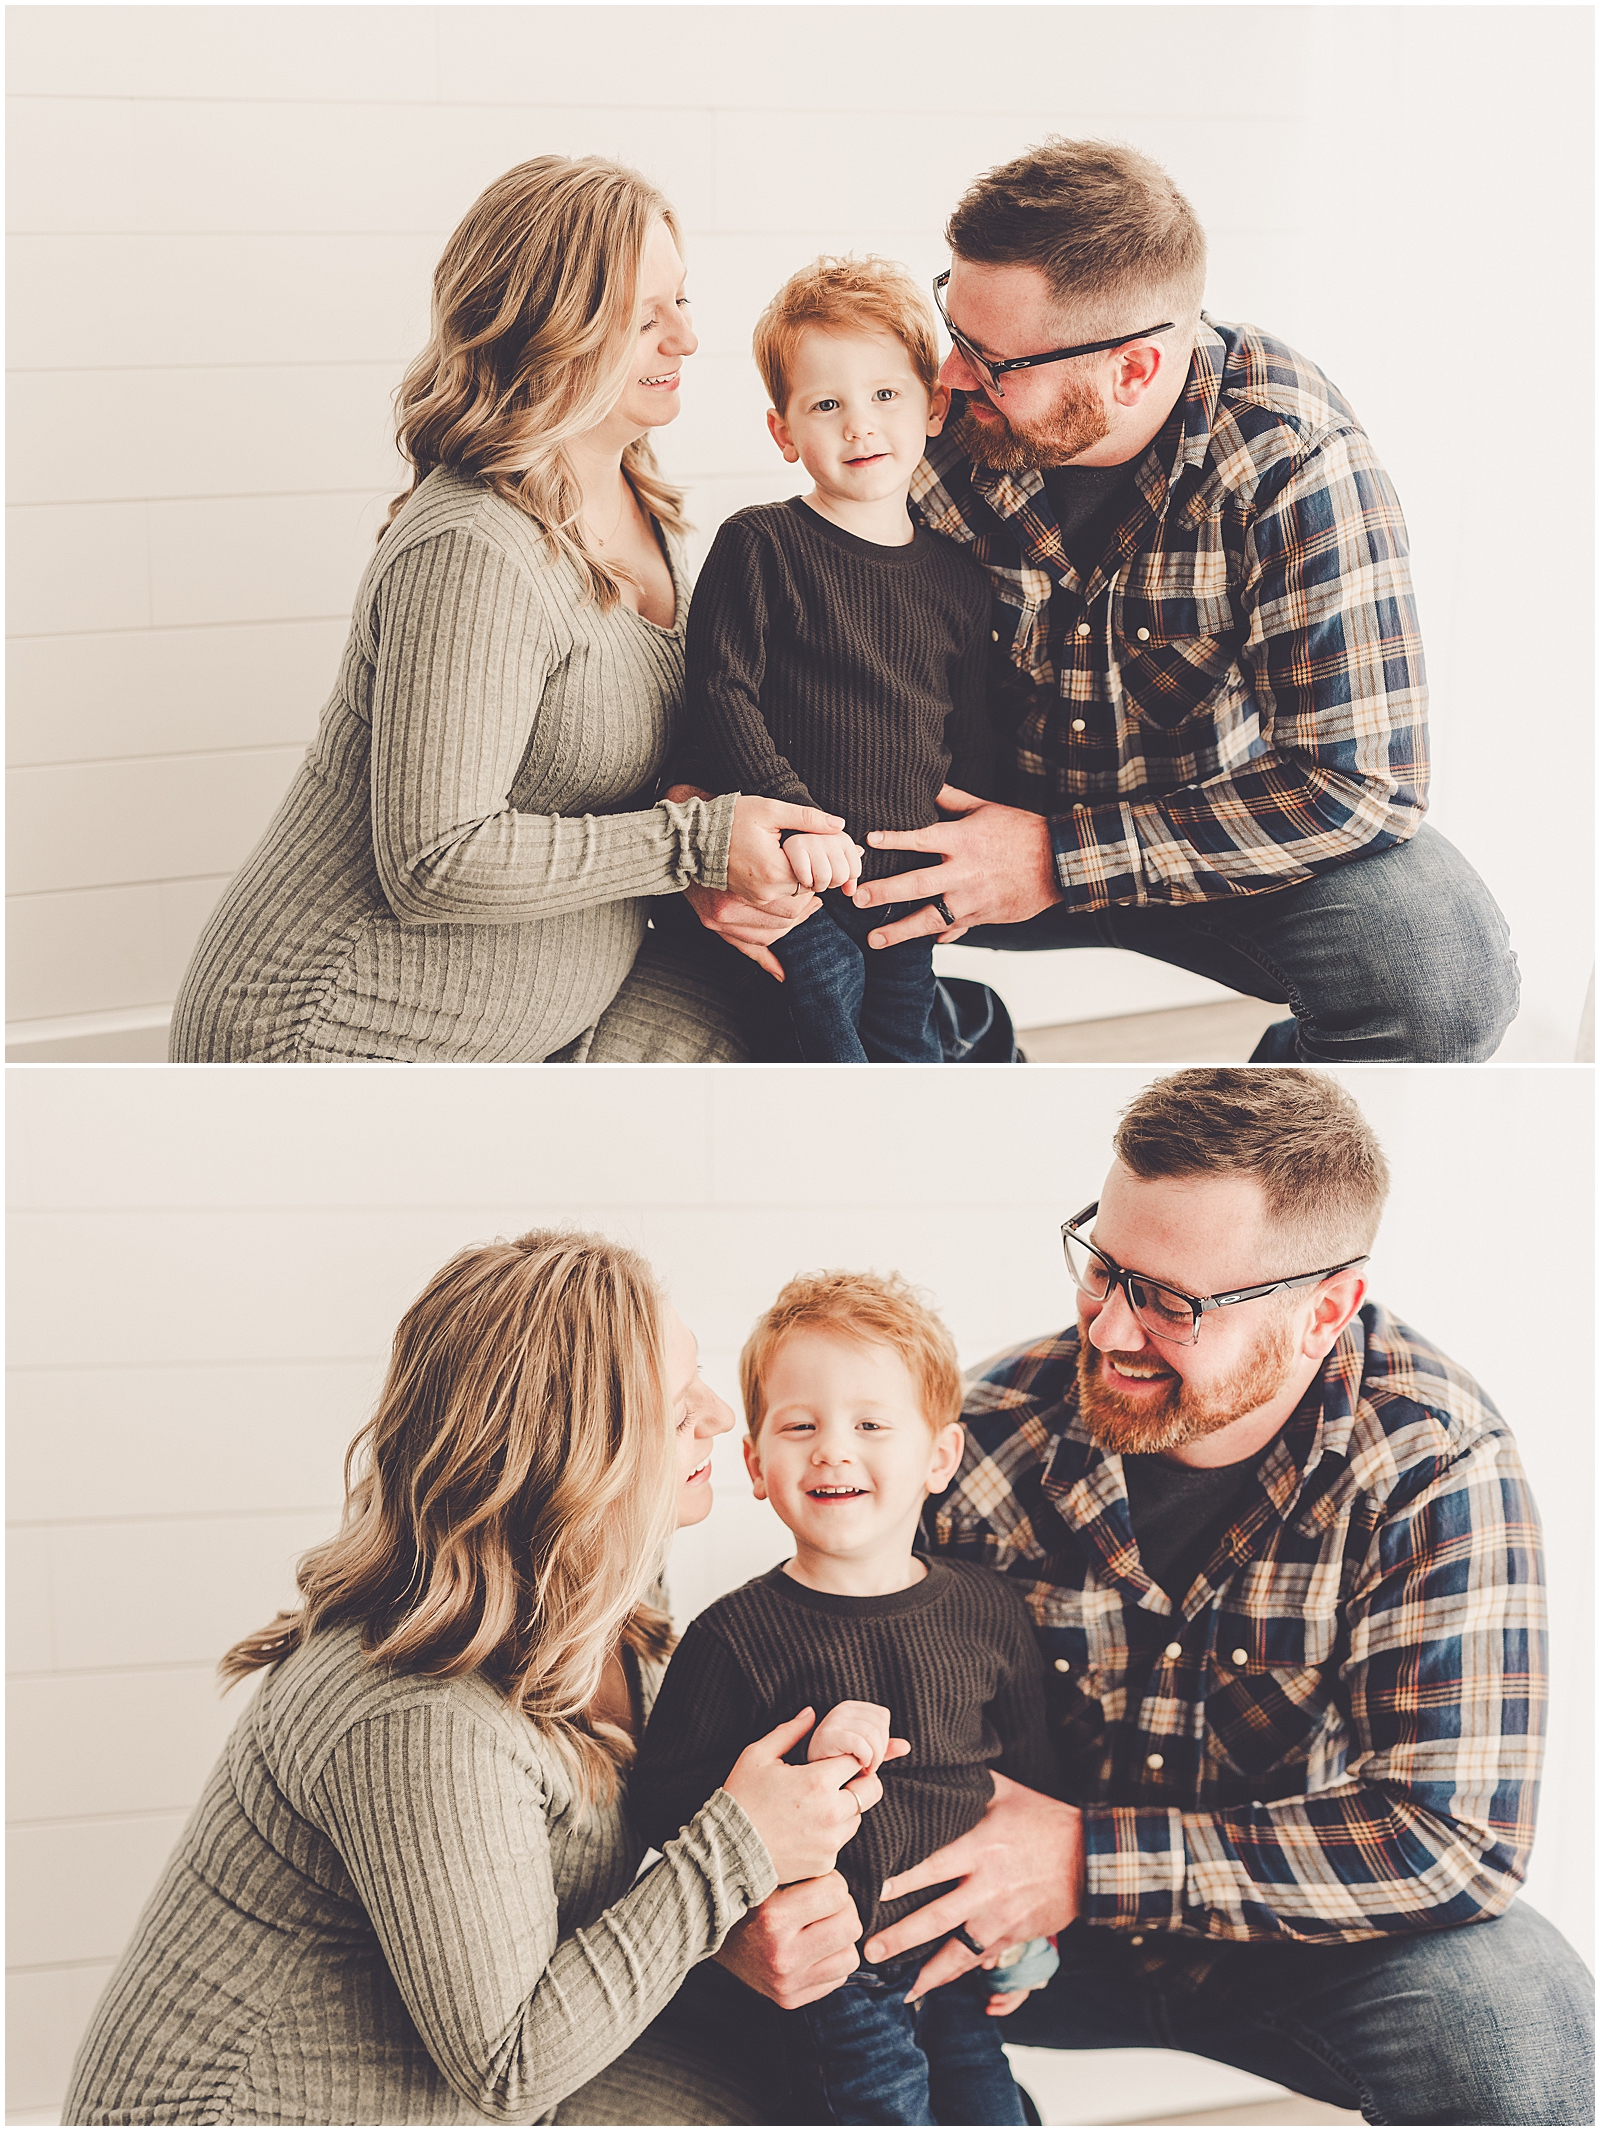 Studio maternity and family photographer in Kankakee with Iroquois County and Kankakee County family photographer Kara Evans Photographer.